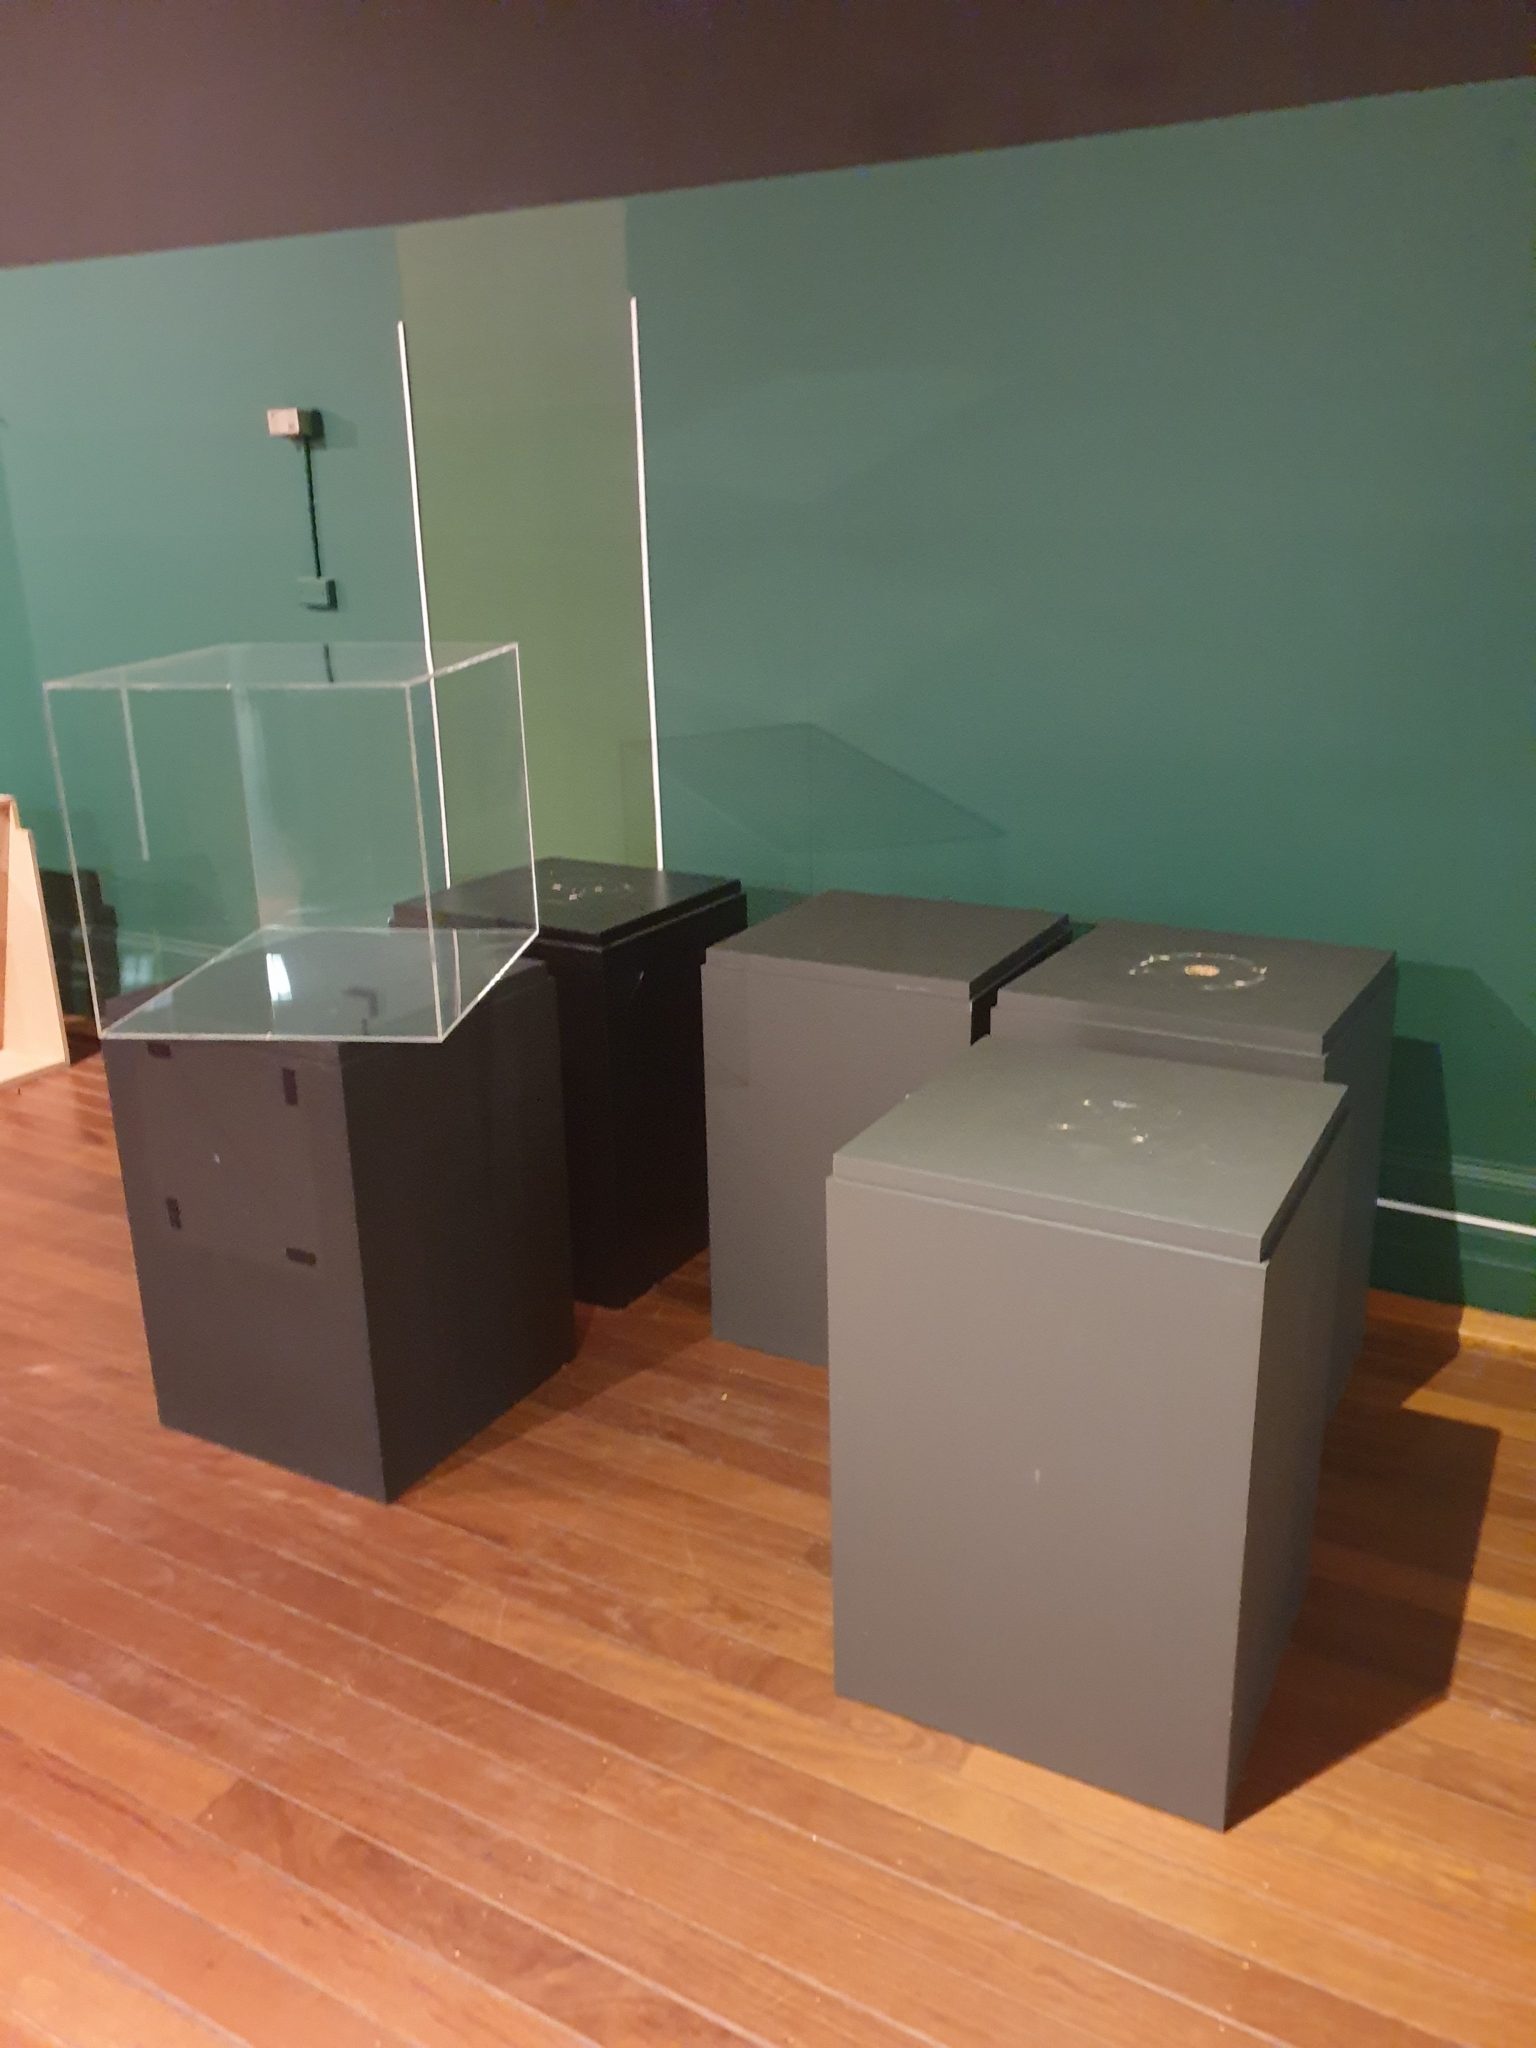 Free Museum Plinths and Acrylic Lids from Sydney University Museums - MGNSW